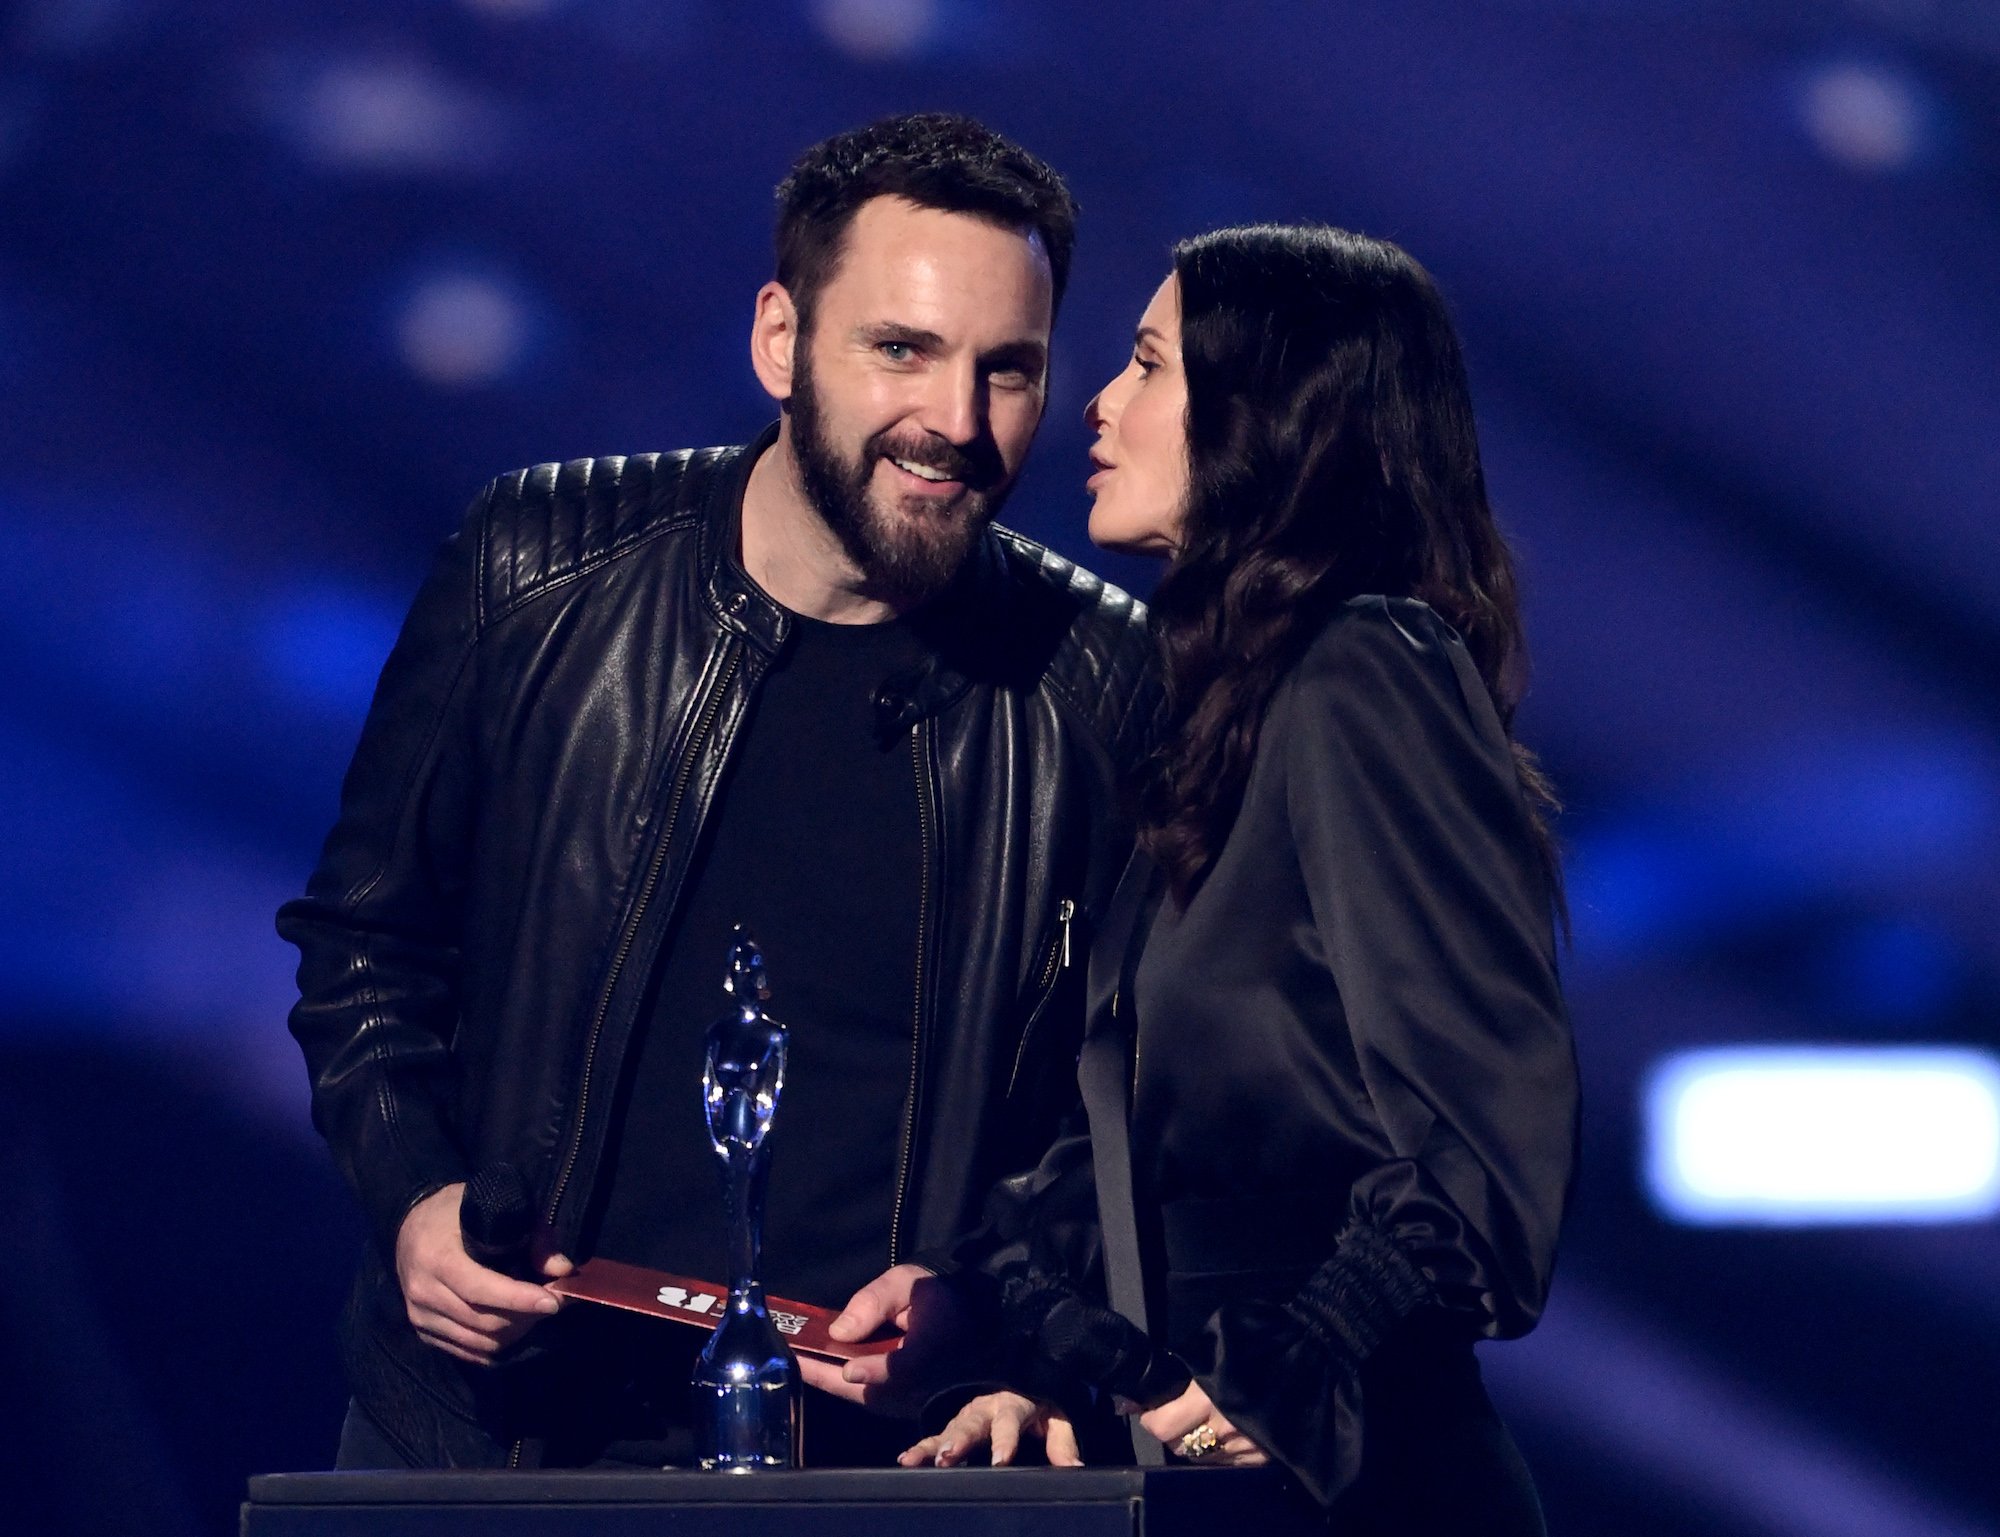 Courteney Cox whispers into Johnny McDaid's ear